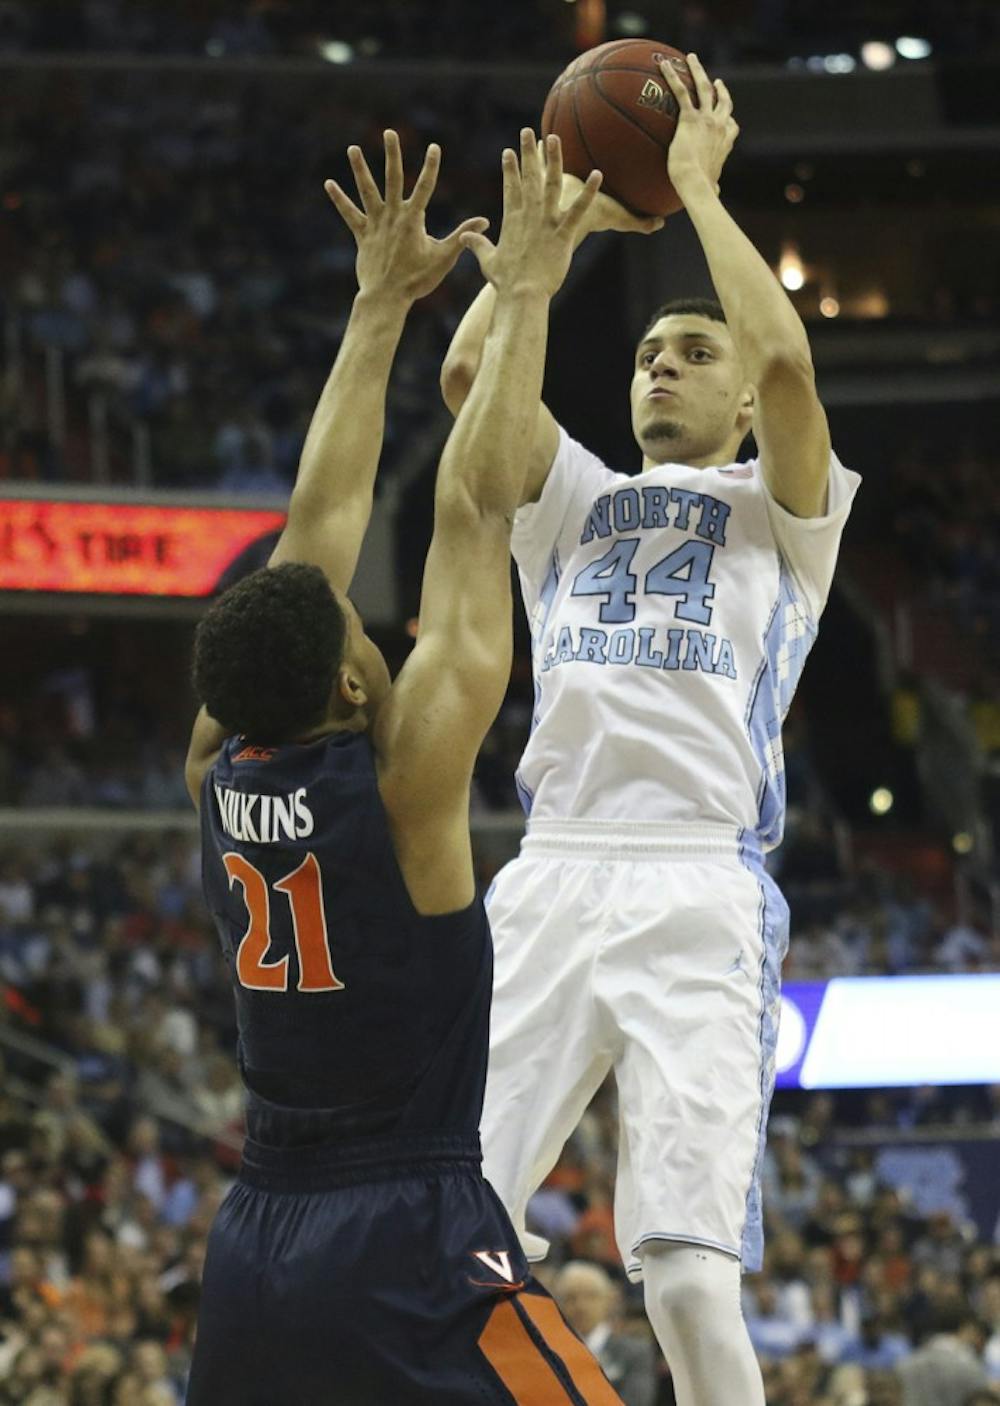 North Carolina wing Justin Jackson (44) pulls up over Virginia forward&nbsp;Isaiah Wilkins (21) in the ACC Tournament final on March 12. The Tar Heels play the Cavaliers on Saturday&nbsp;for the first time since this game.